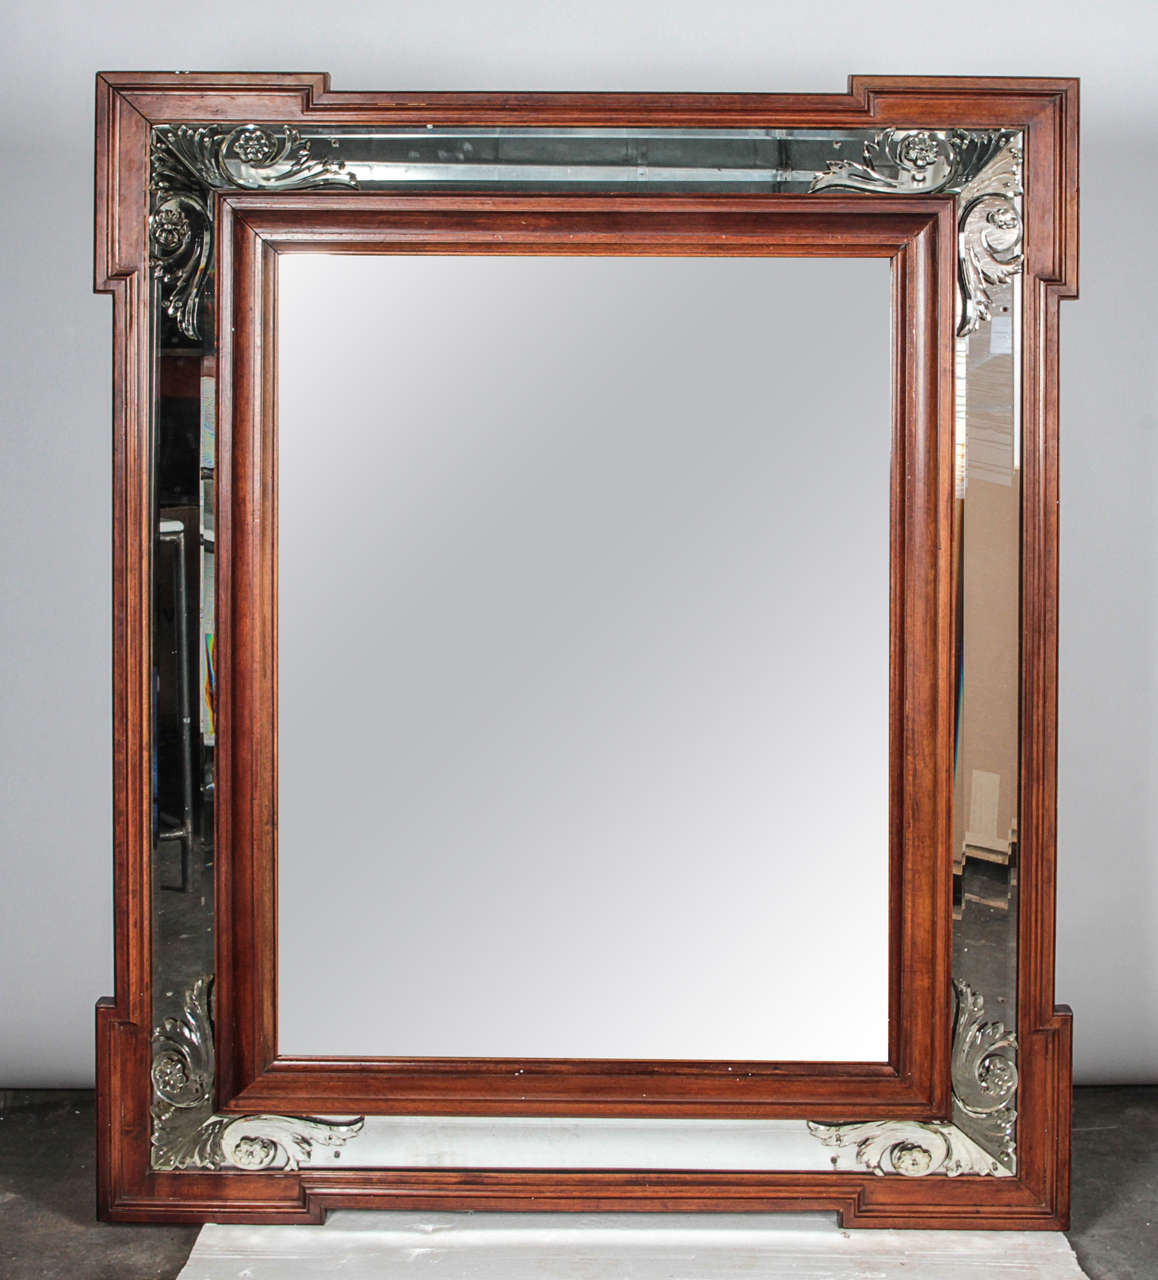 Art Deco mirror with beautiful scroll detail in mirror along frame edges. Wooden outer and inner edging adds depth and accentuates the deco design. Interior (main) mirror and edges are both beveled.

Not available for sale or to ship in the state